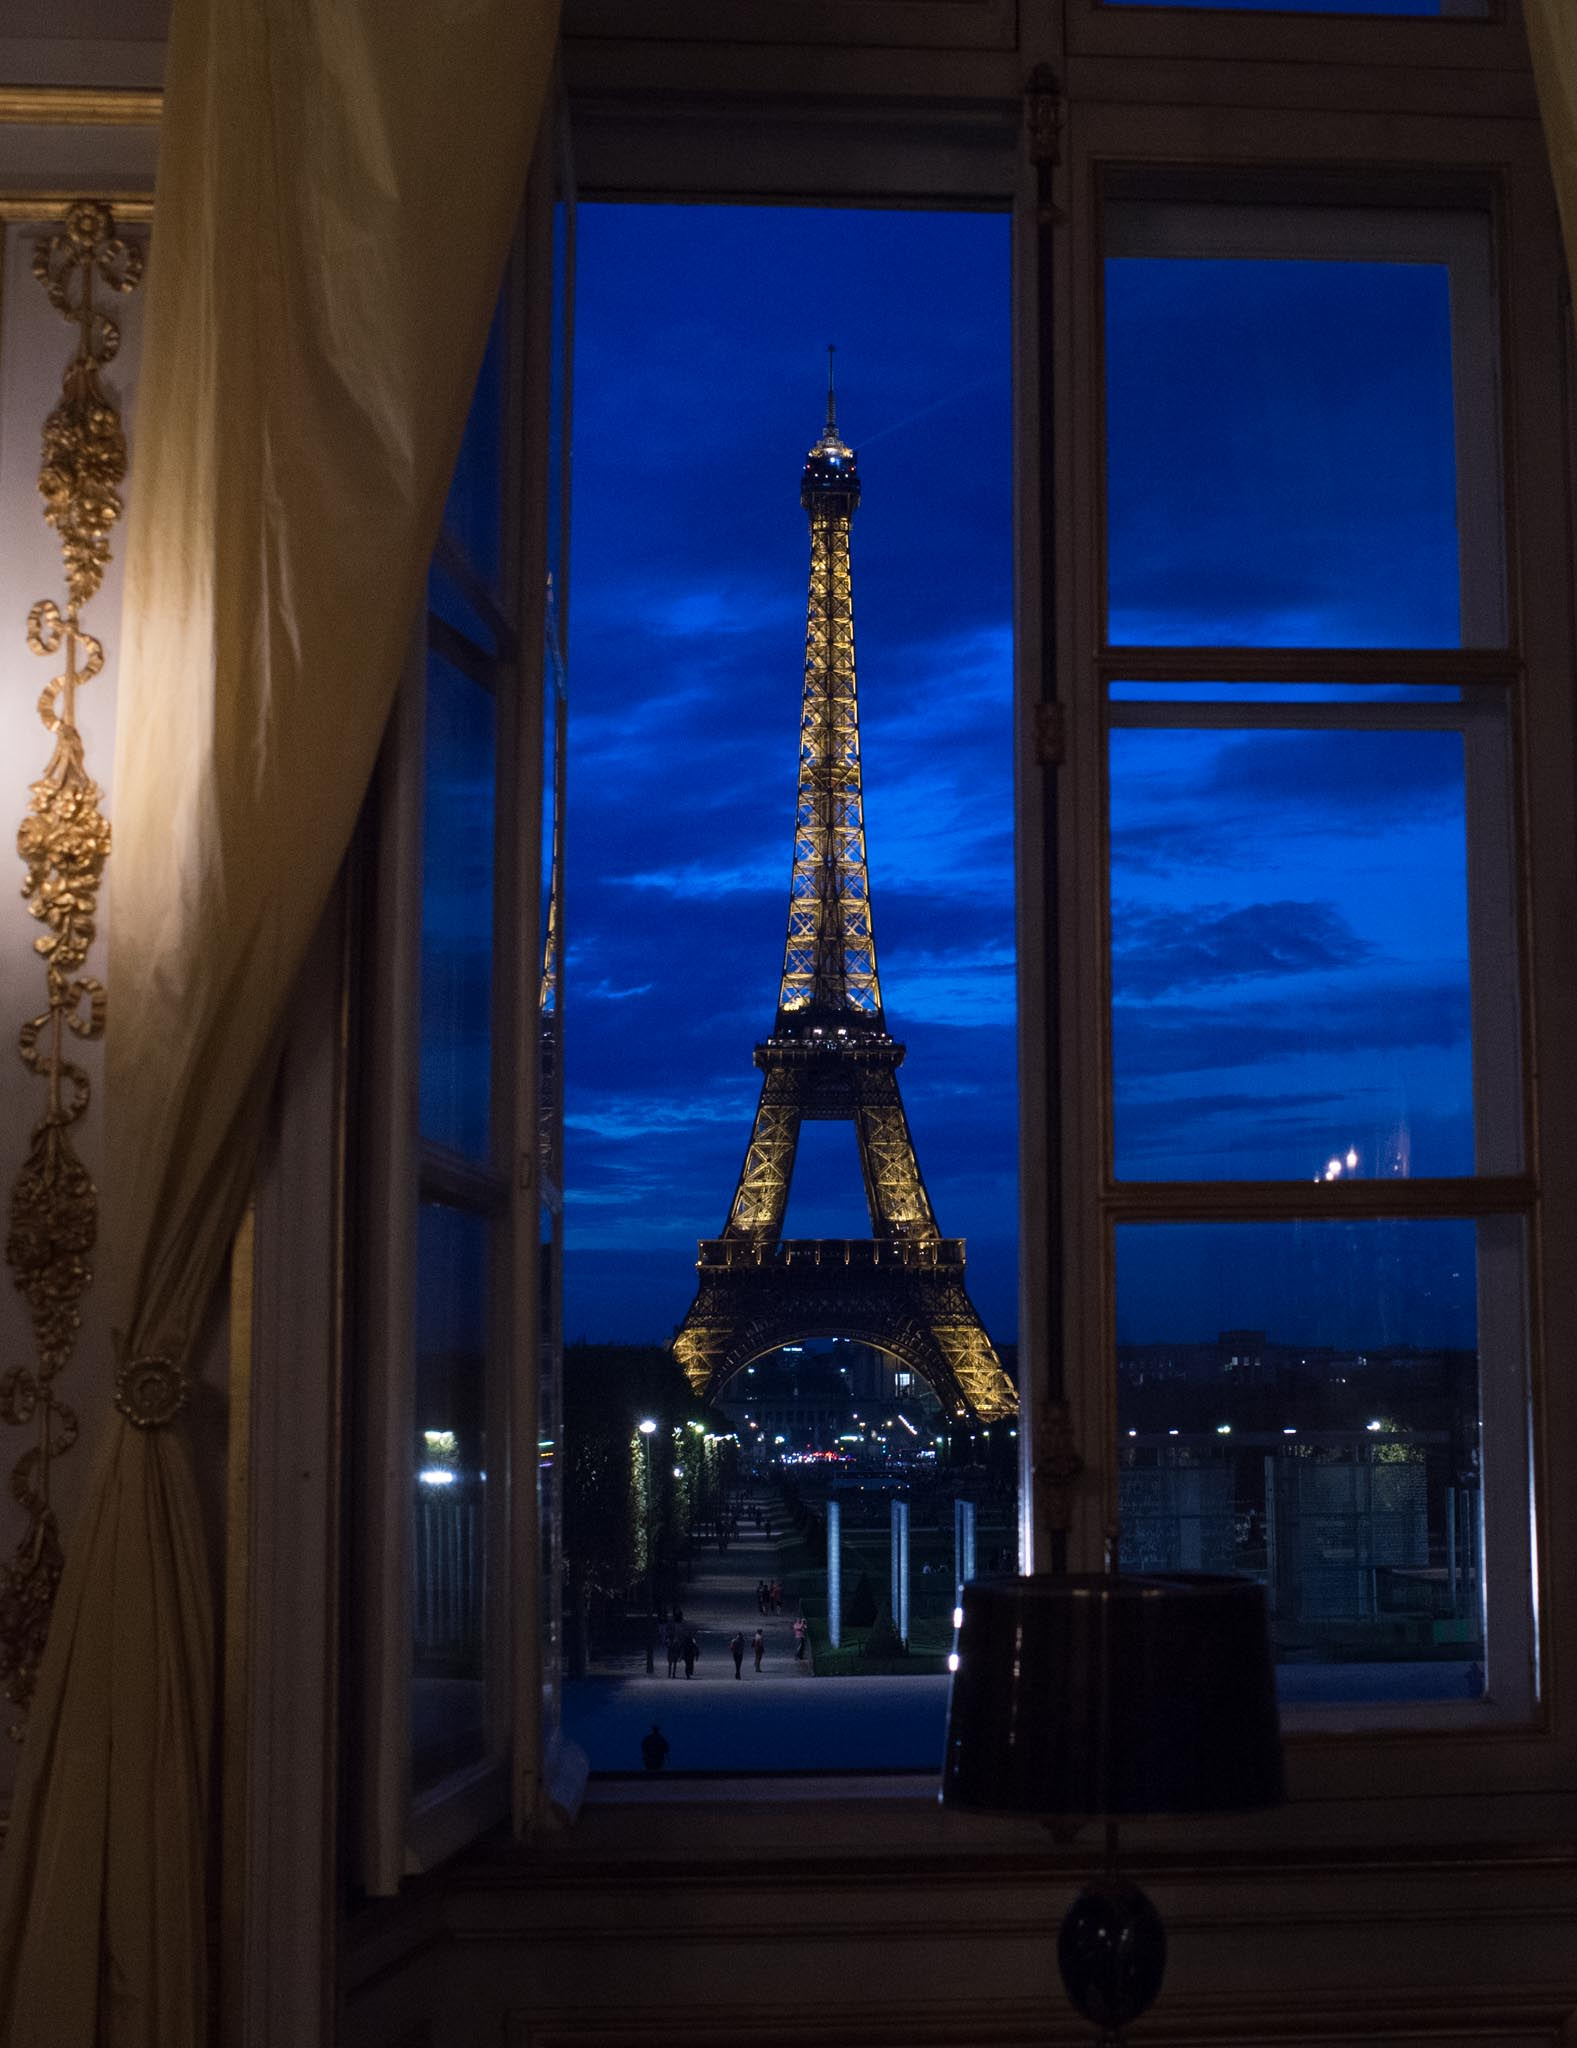 Is it Legal to Photograph the Eiffel Tower at Night?